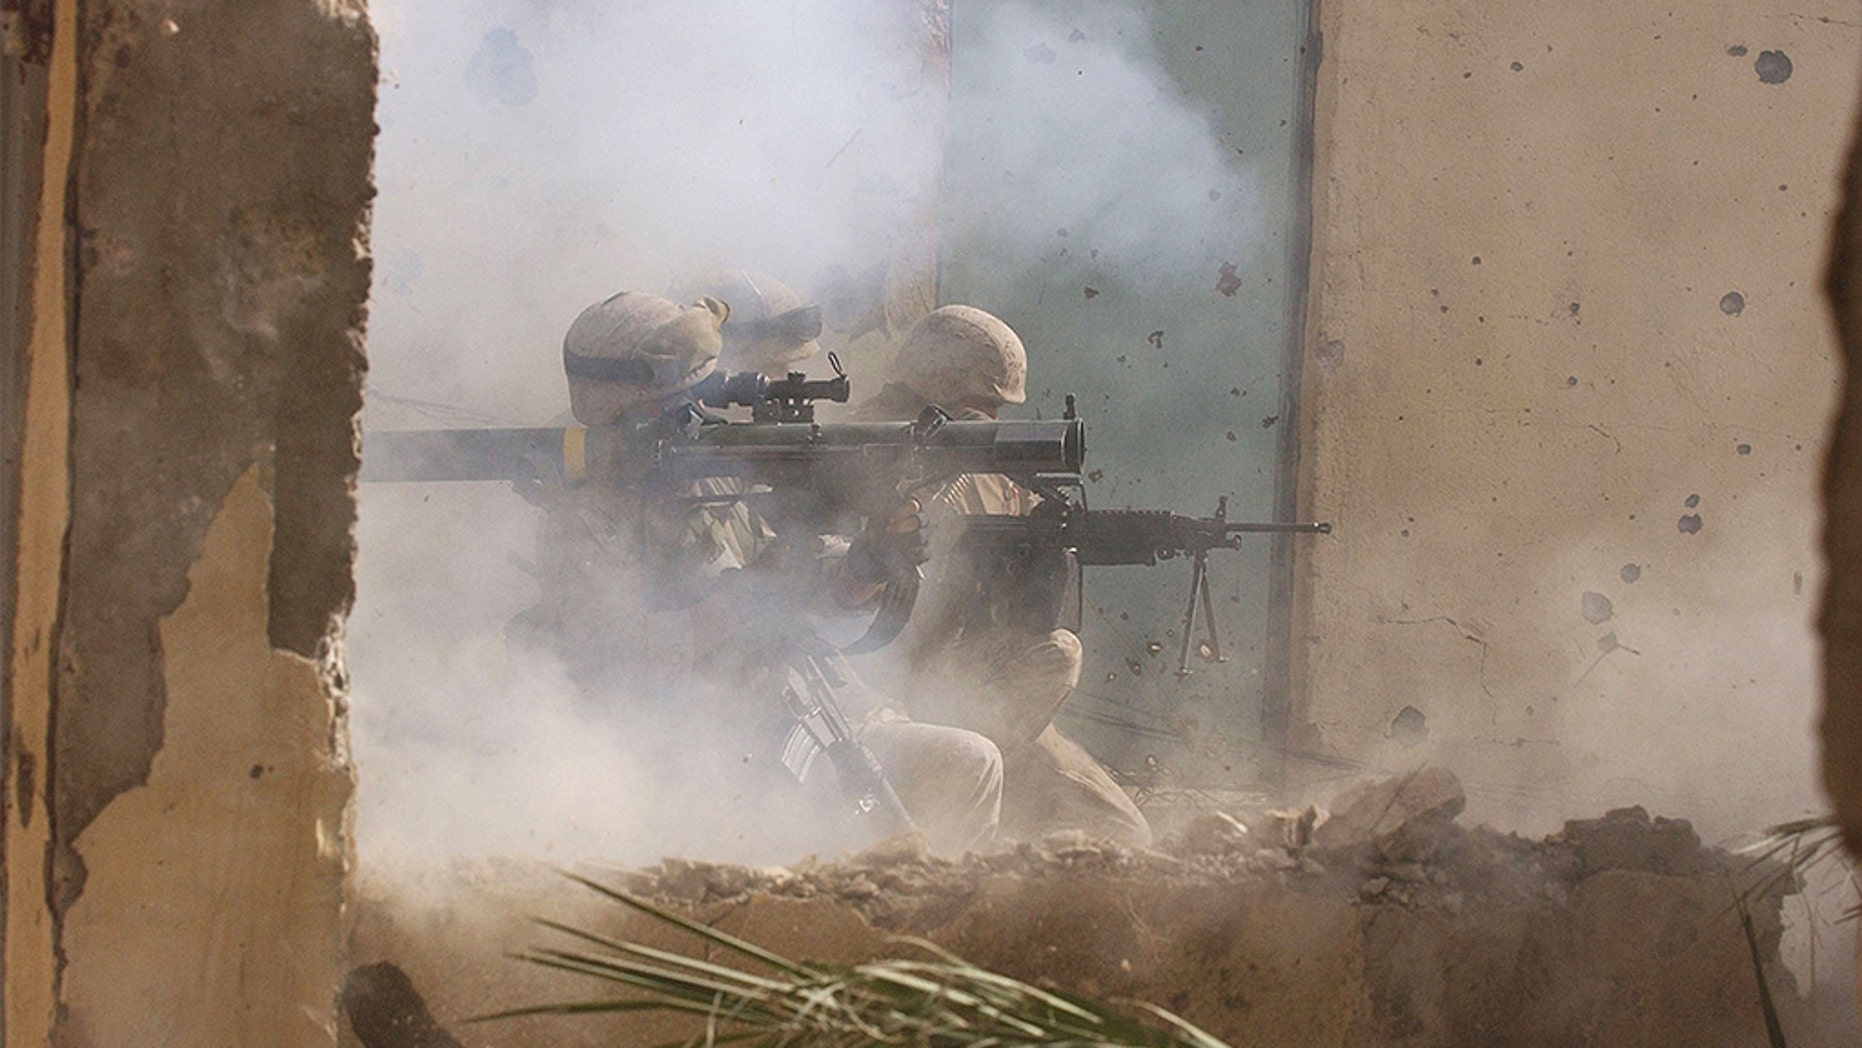 FILE -- NOVEMBER 23, 2004: U.S. Marines of the Light Armored Reconnaissance (LAR) company of 1st Battalion 3rd Marines, fire a rocket to clear houses at the site where four insurgents staged a bloody counter-attack, killing one American and wounding many others in Fallujah, Iraq.  (Photo by Scott Peterson/Getty Images)